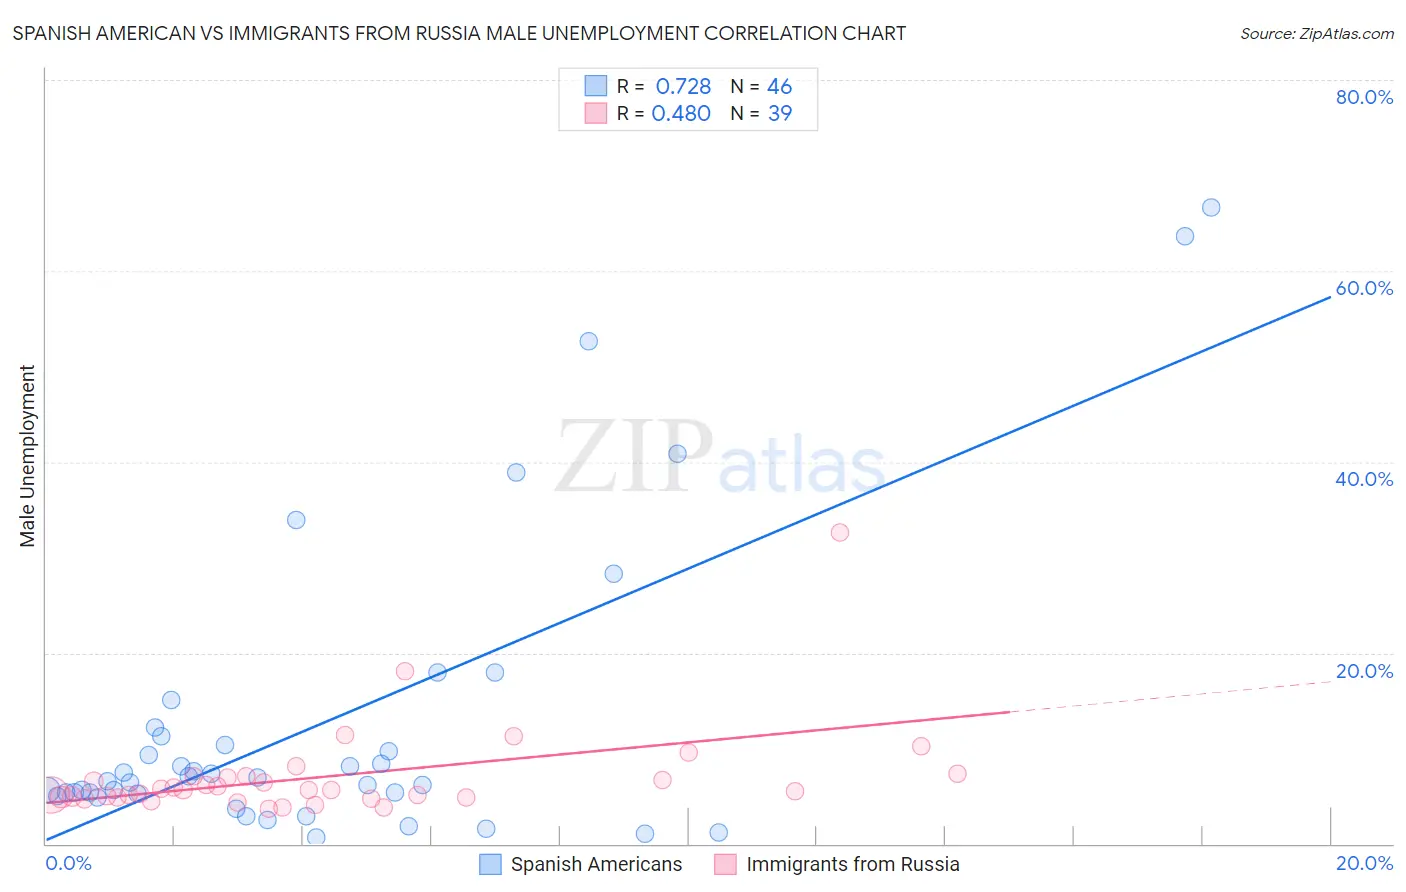 Spanish American vs Immigrants from Russia Male Unemployment